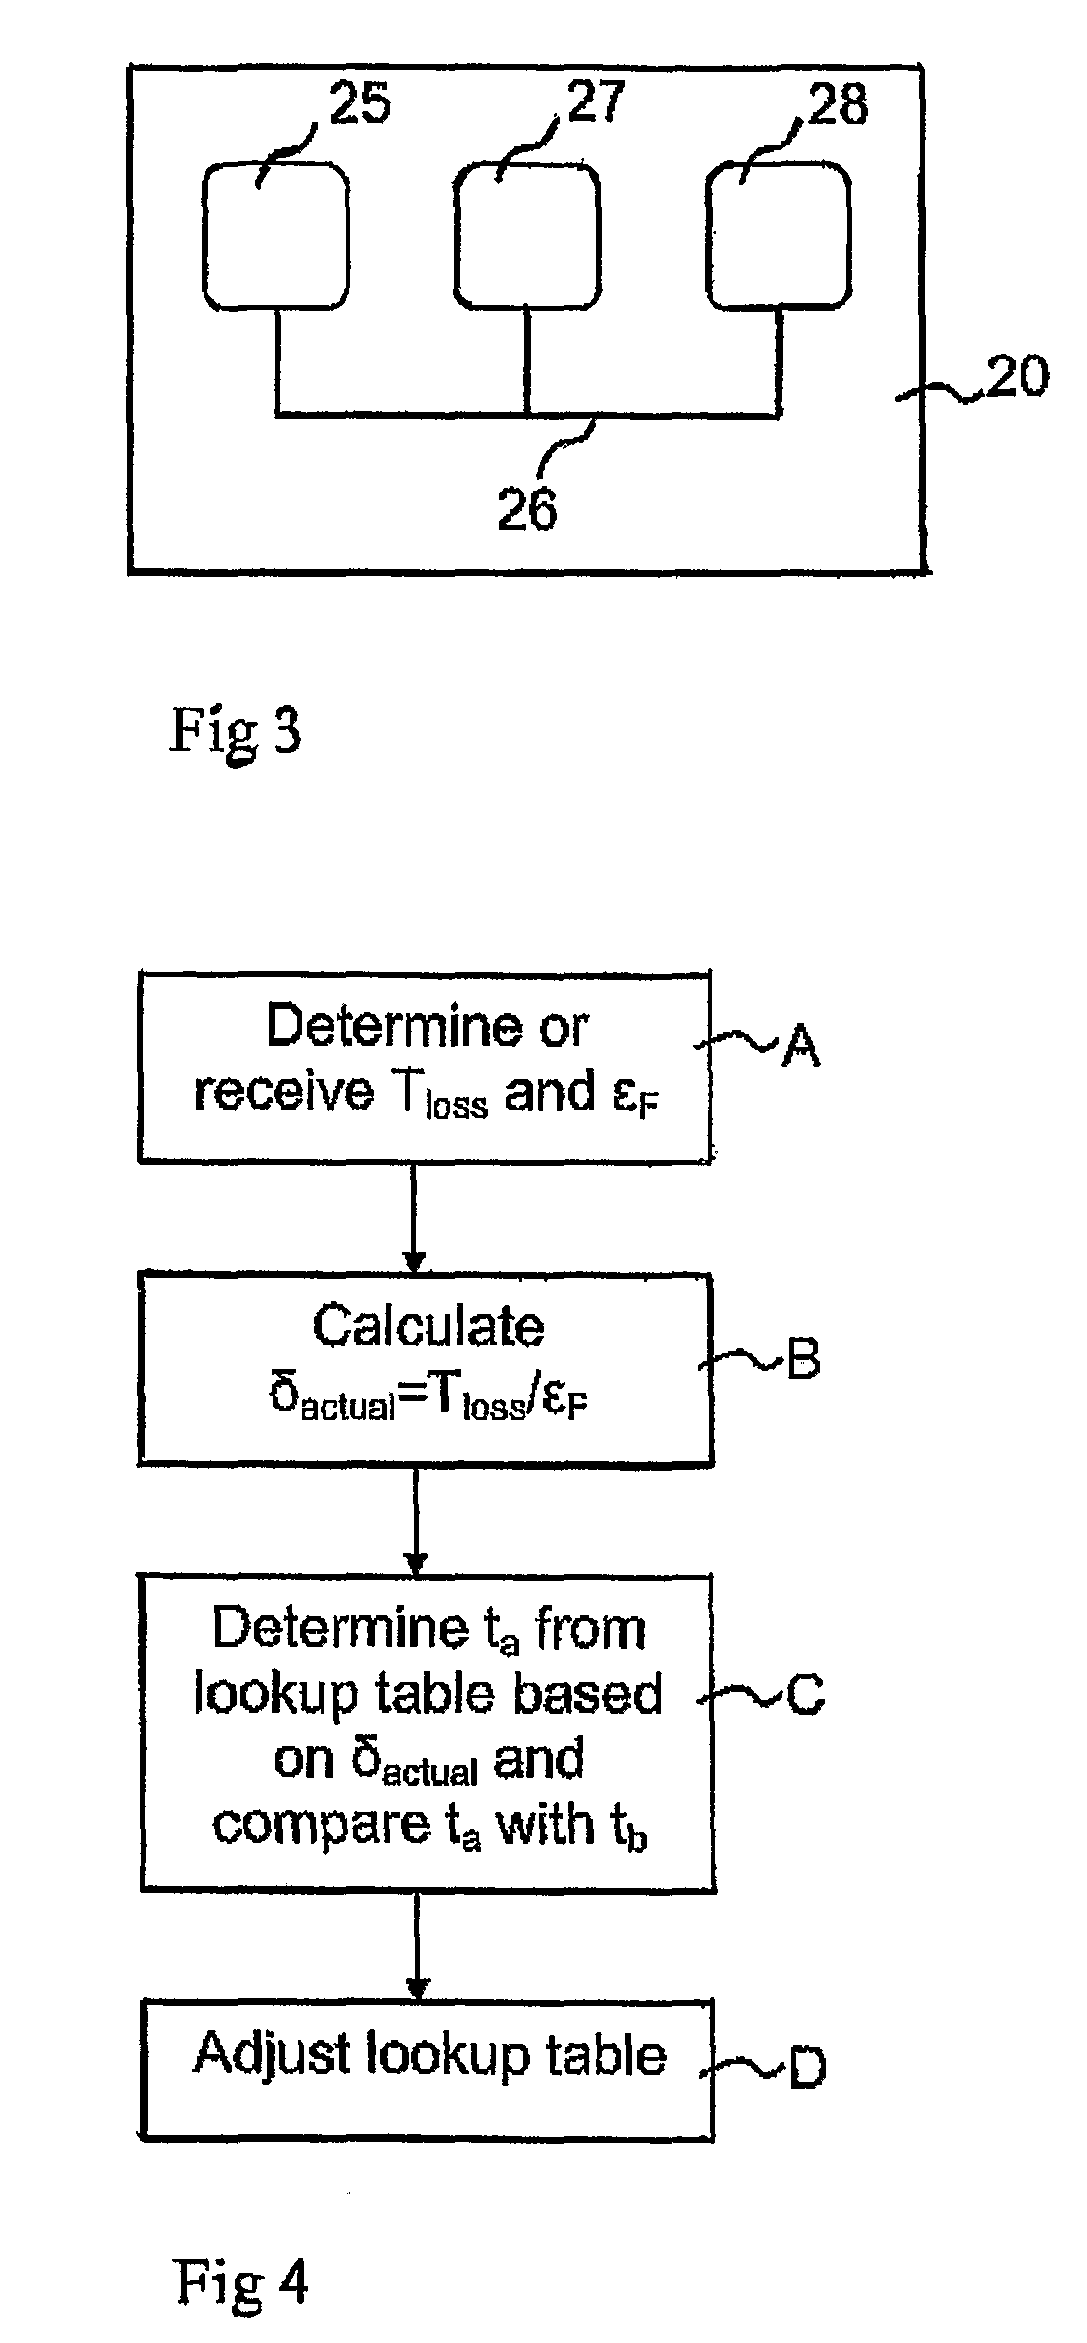 Method for adjusting a lookup table and a system for controlling an injector of a cylinder in a combustion engine